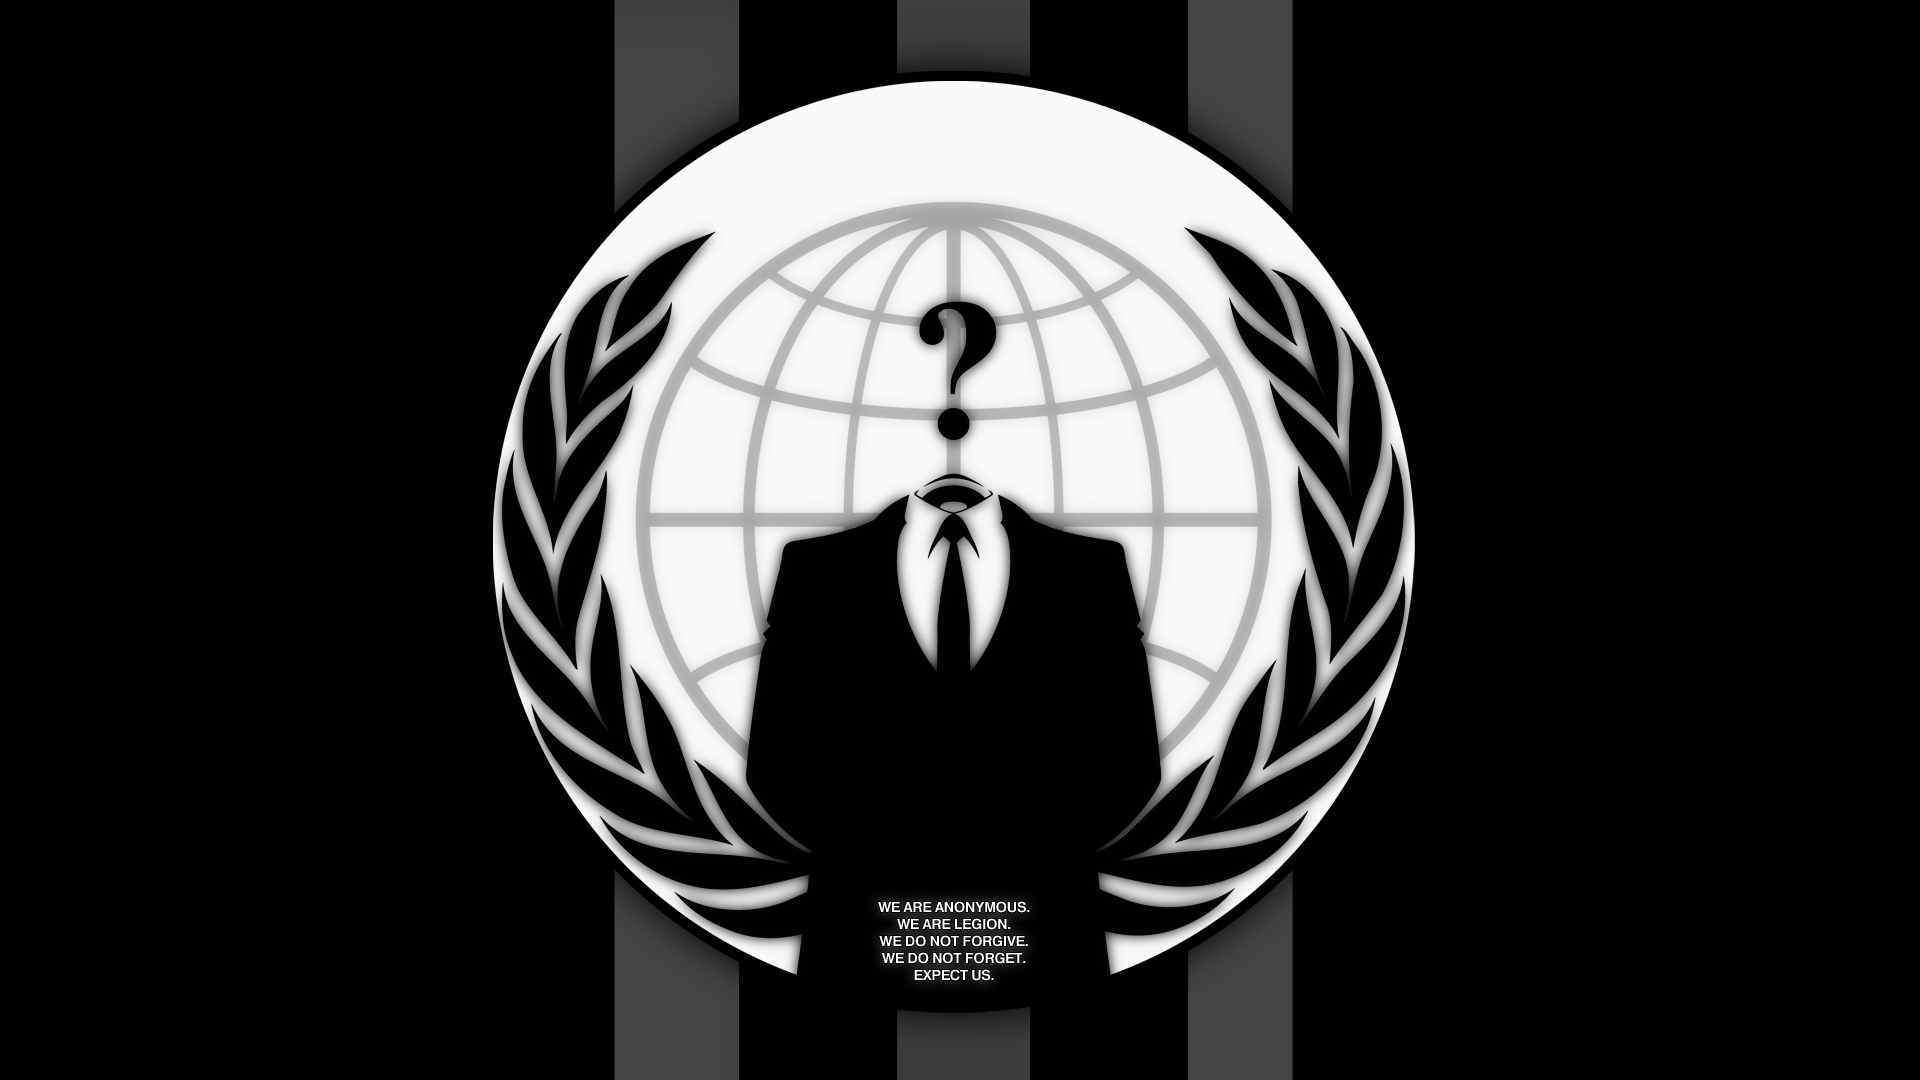  wallpaper hdtv widescreen we are anonymous we are legion we do not 1920x1080